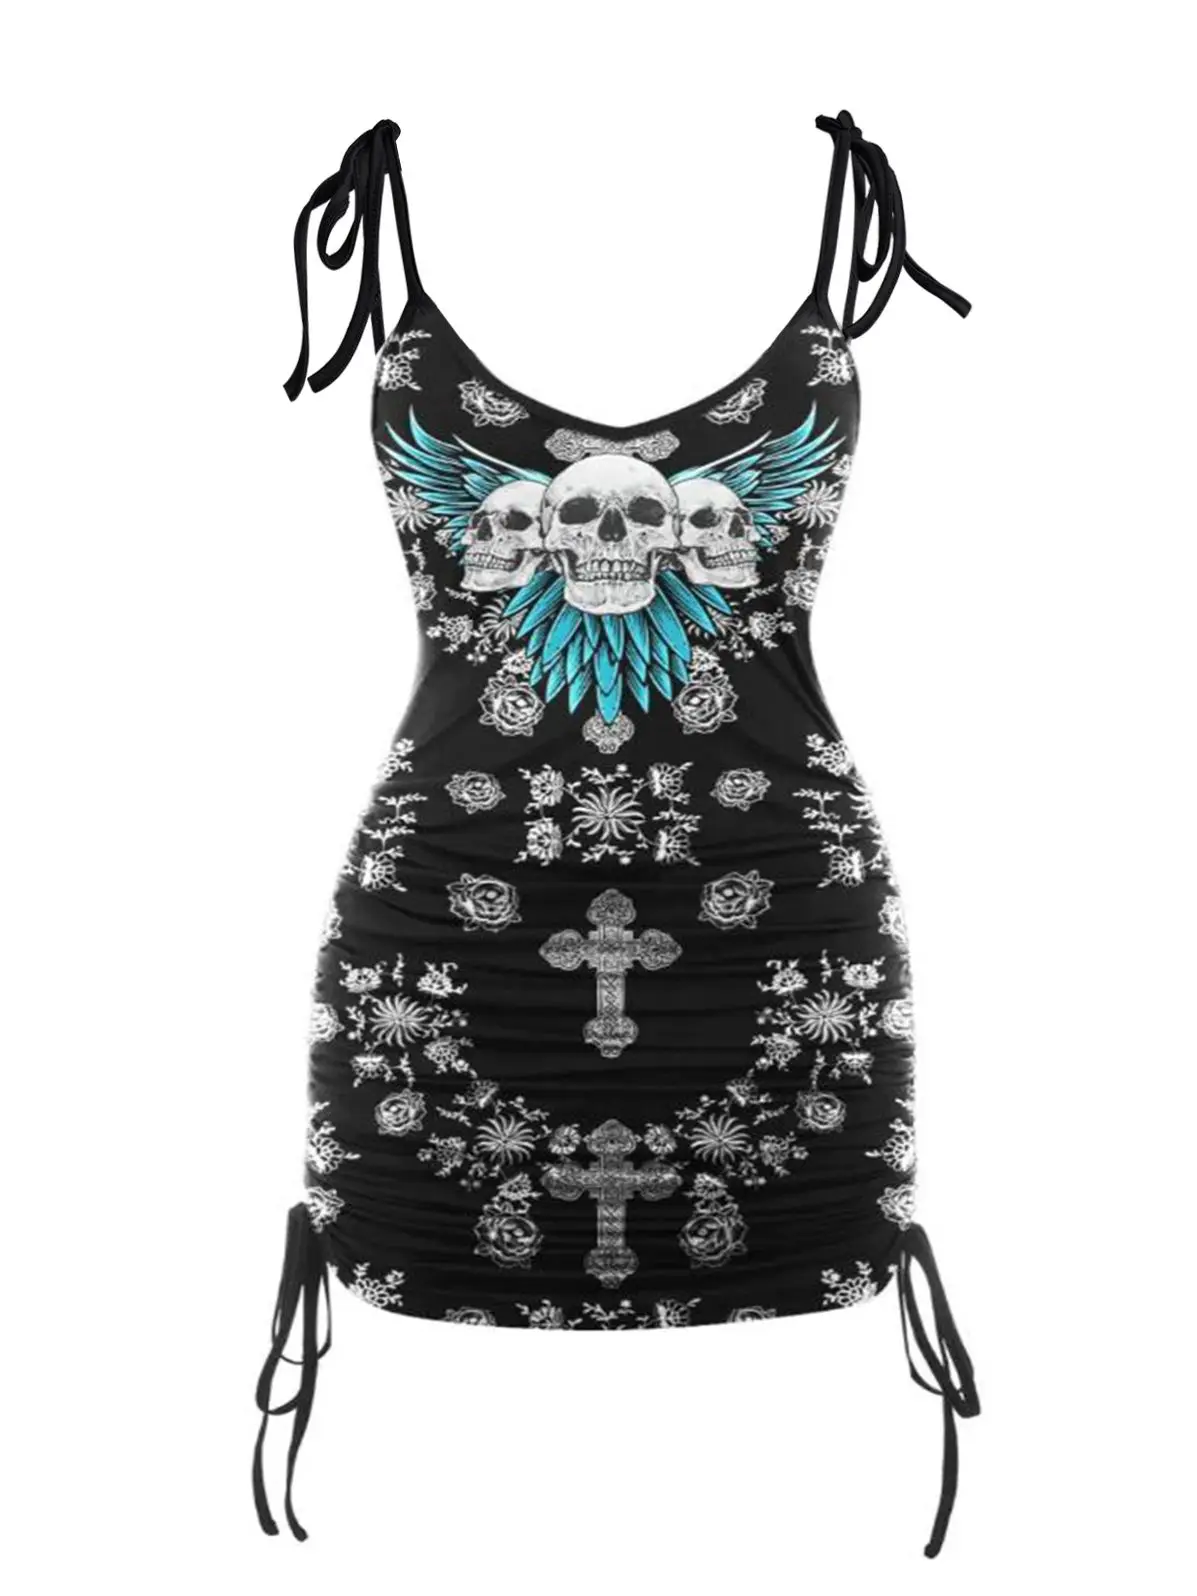 

Dressfo Flower Skull Wing Print Halloween Long Tank Top Cinched Tie Knot Strap Sleeveless Women Vest Summer Breathable Camisole